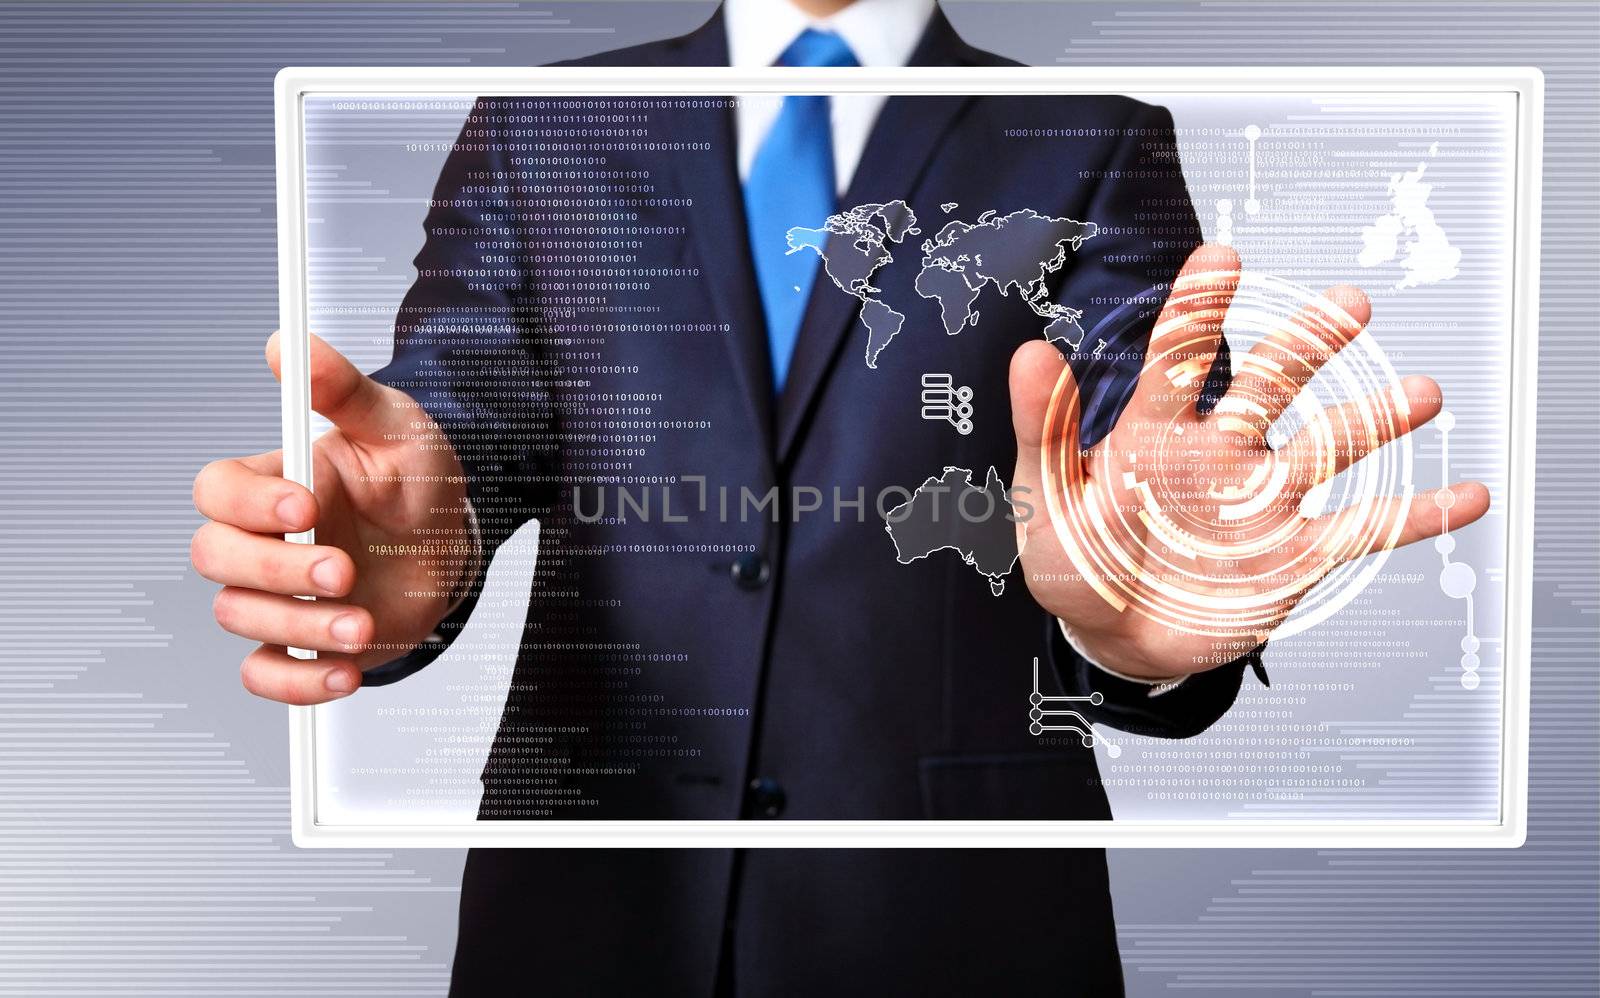 Businessman in blue suit working with digital vurtual screen